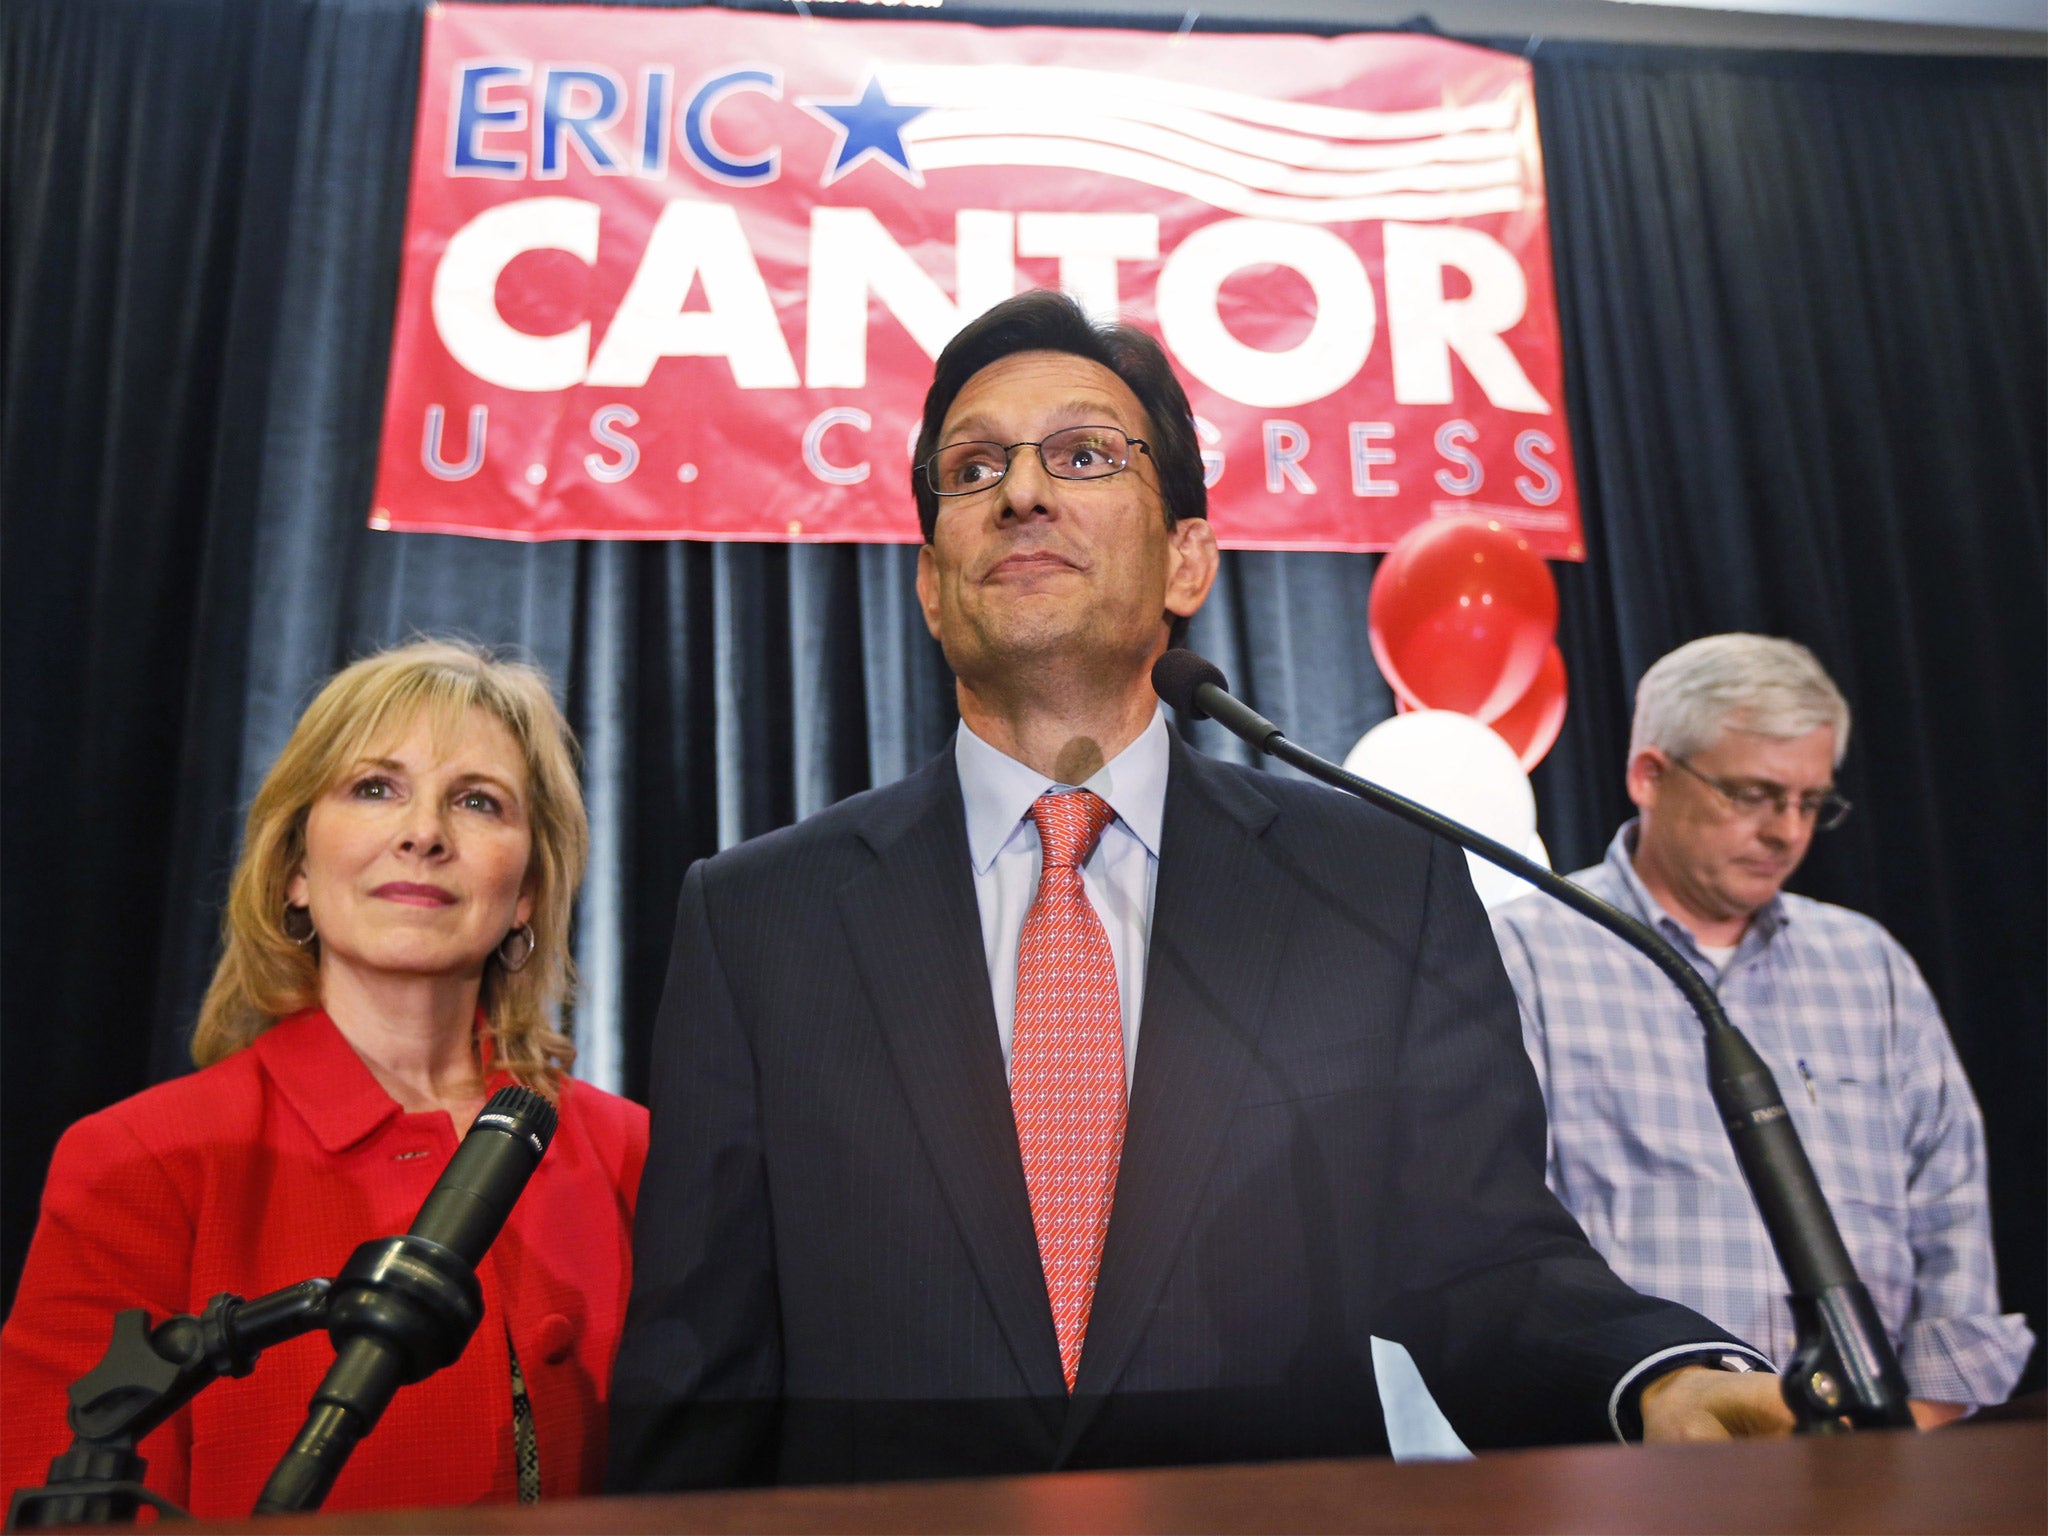 House Majority Leader Eric Cantor, flanked by his wife Diana, delivers his concession speech in Richmond, Virginia